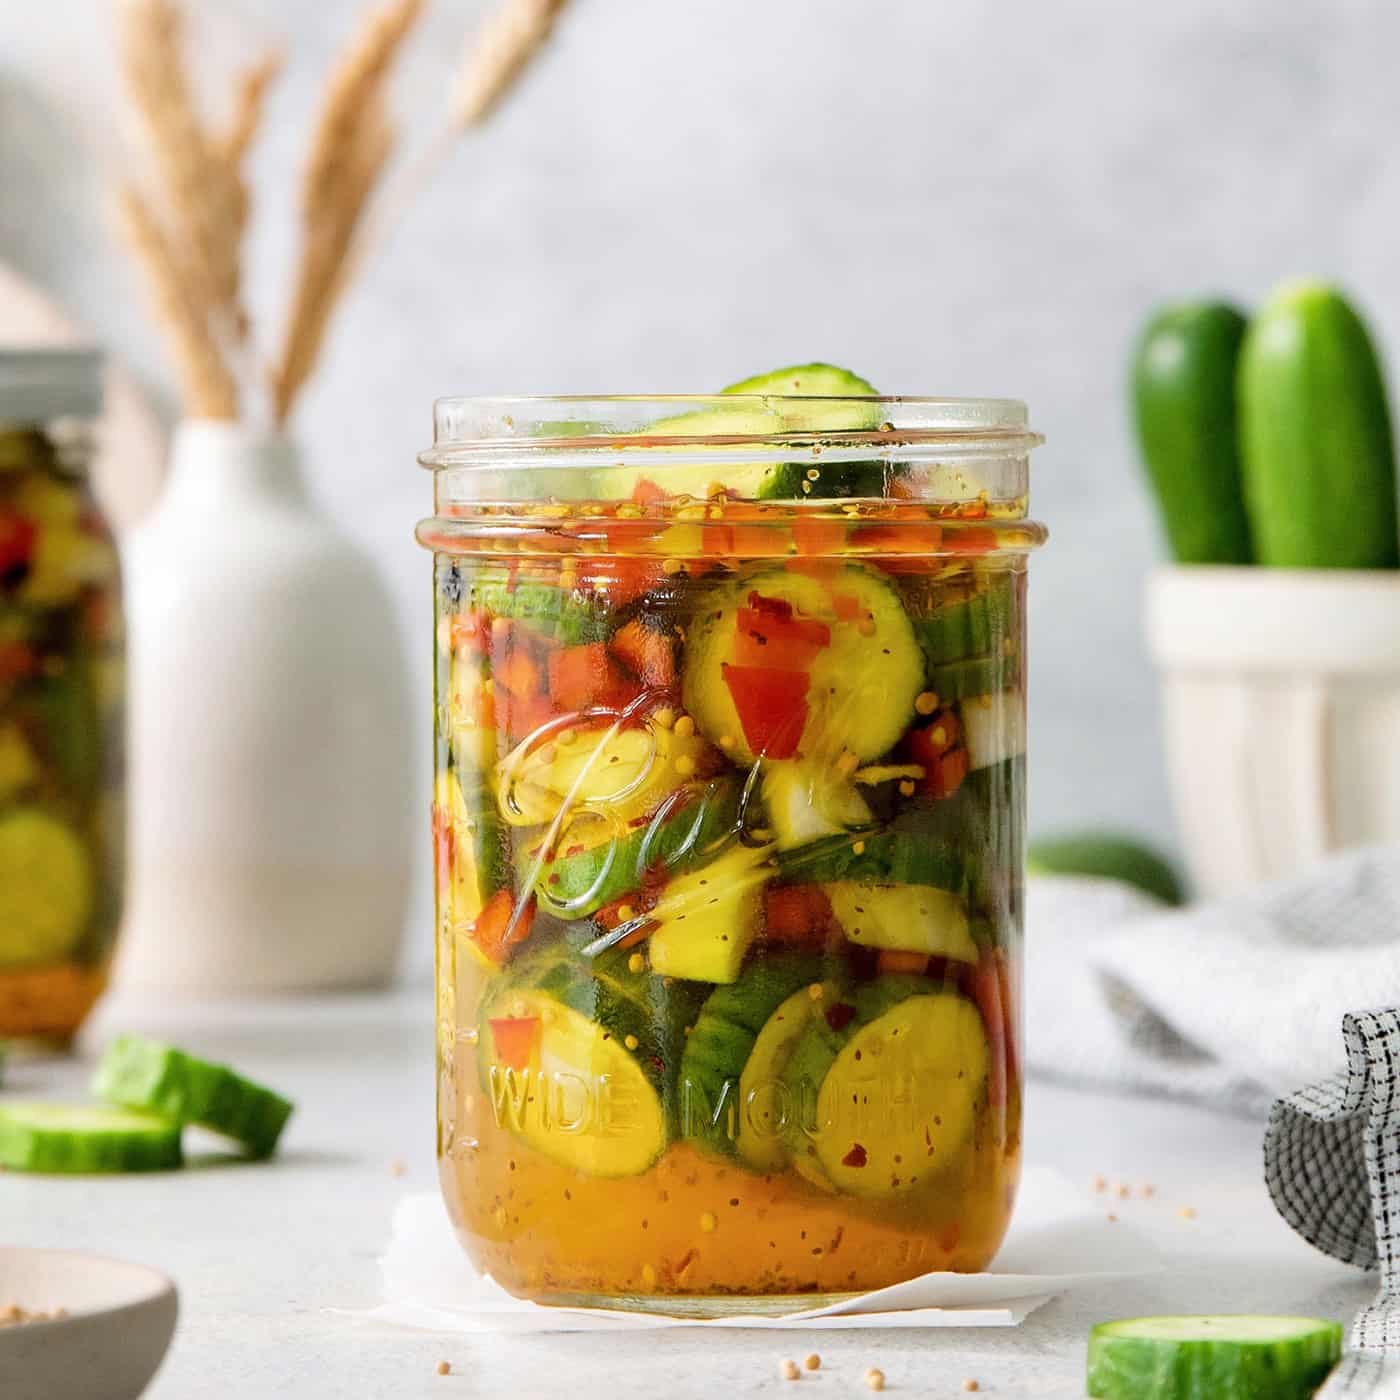 A jar of sweet and spicy pickles.